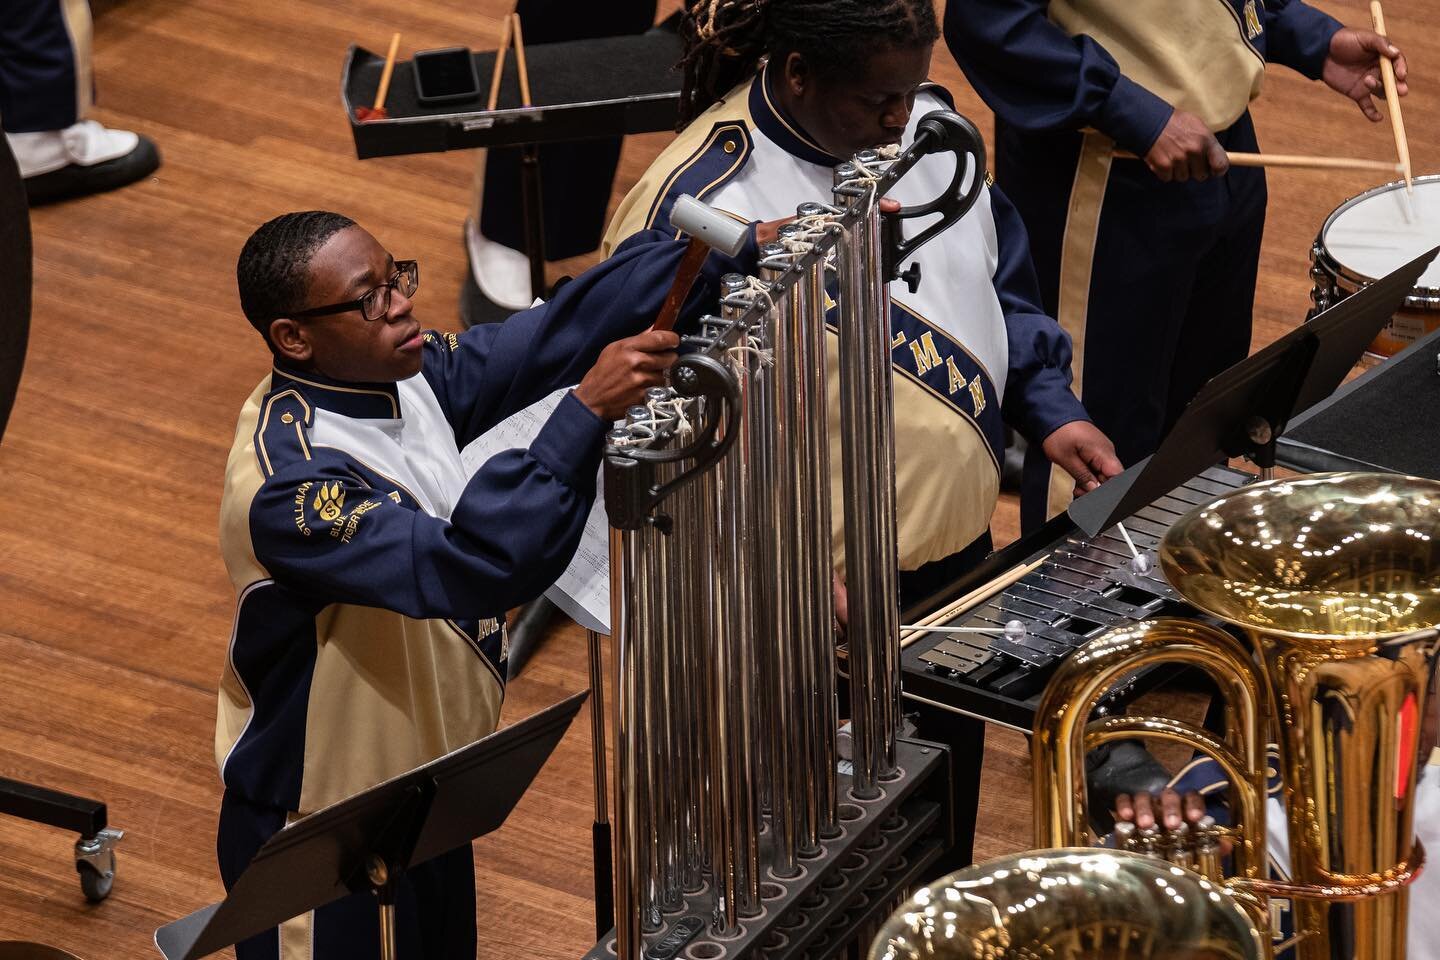 Junior Music Education major, @promarcusss plays chimes during the Stillman College Symphonic Band&rsquo;s performance. #KennedyCenter #GoTigers
#StillmanCollege